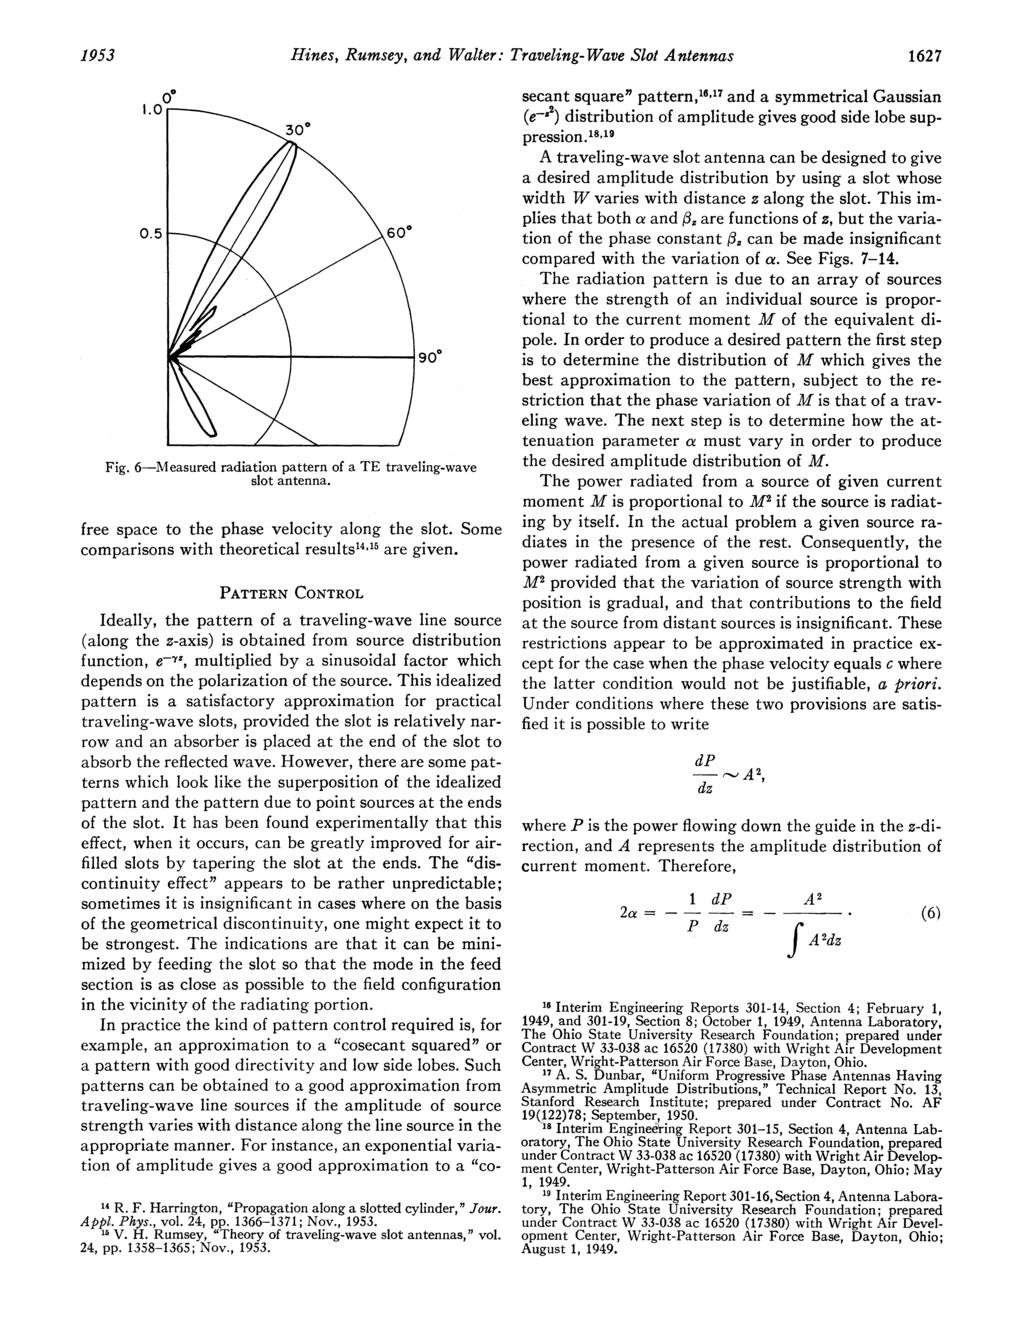 1953 Hines, Rumsey, and Walter: Traveling- Wave Slot Antennas 1627 Fig. 6-Measured radiation pattern of a TE traveling-wave slot antenna. free space to the phase velocity along the slot.